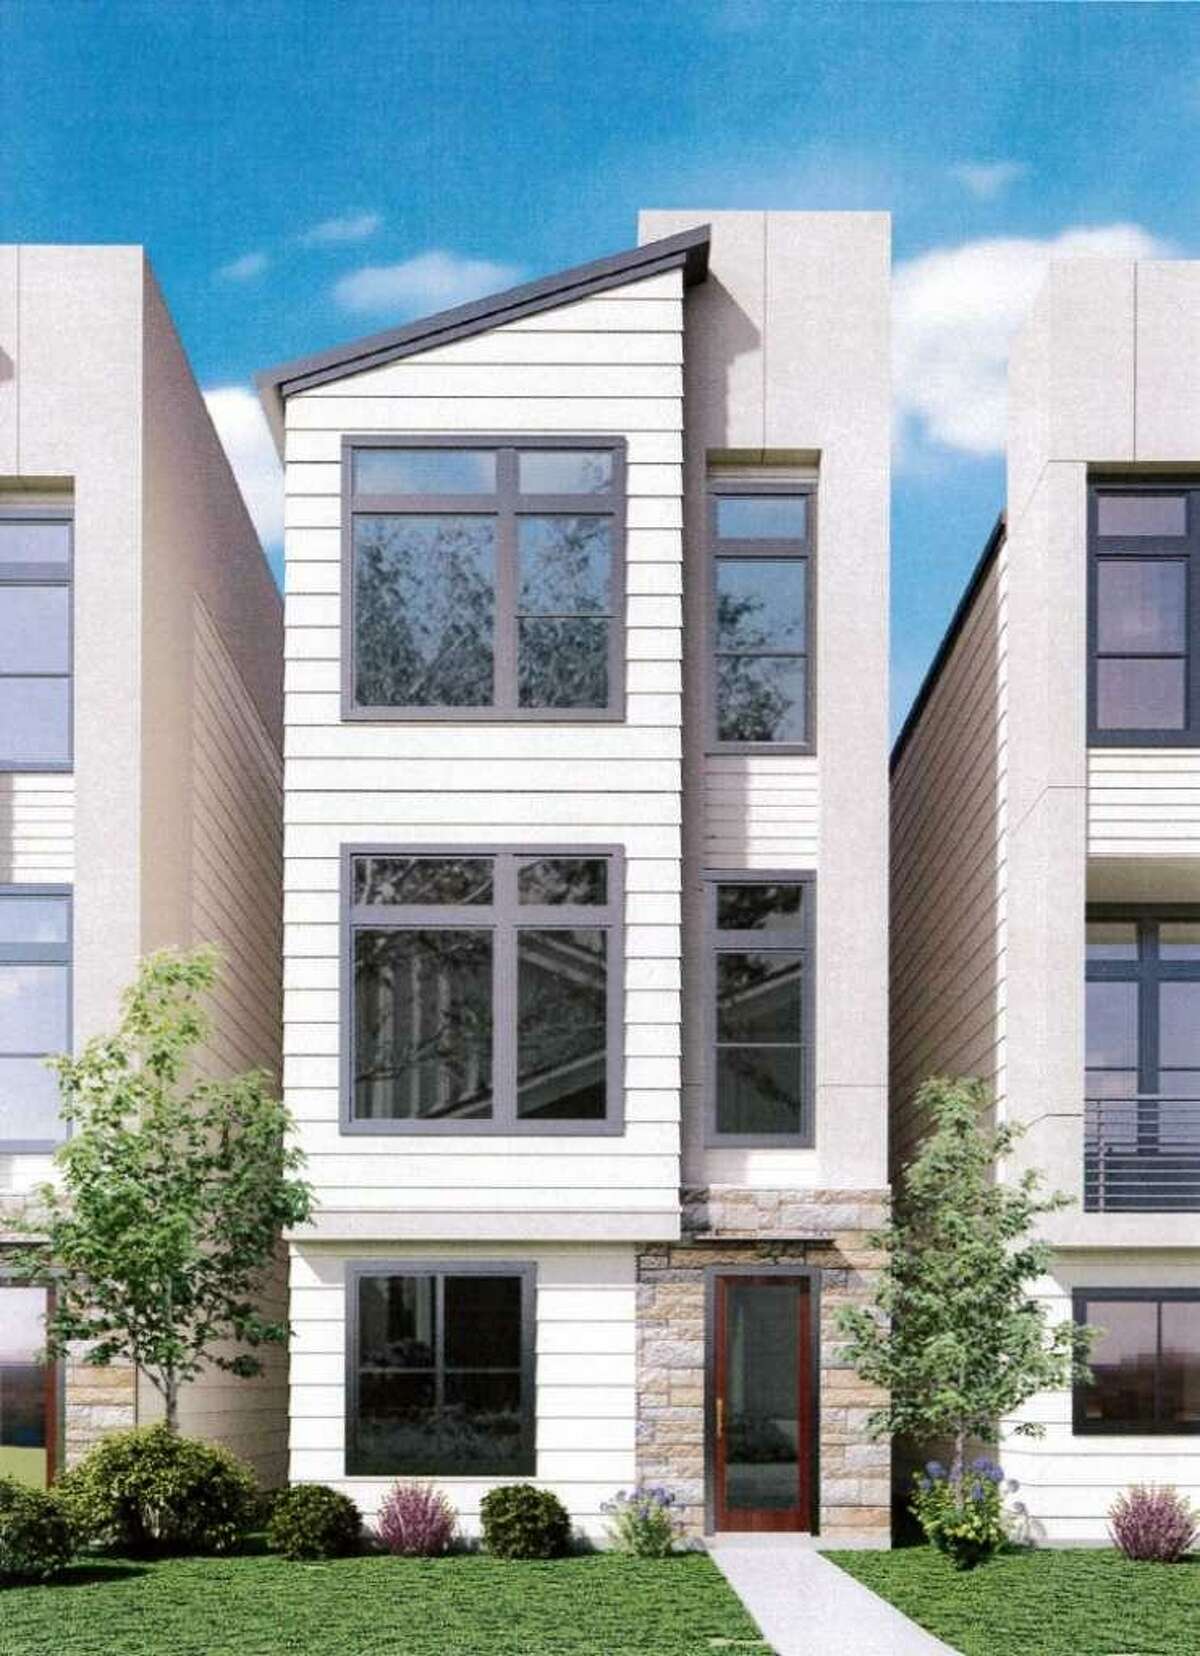 In Mahncke Park, David Weekley Homes is building a cluster of 22 homes at the corner of Brackenridge Avenue and North Pine Street, a block from the thriving Broadway corridor. It’s also planning a Southtown project.